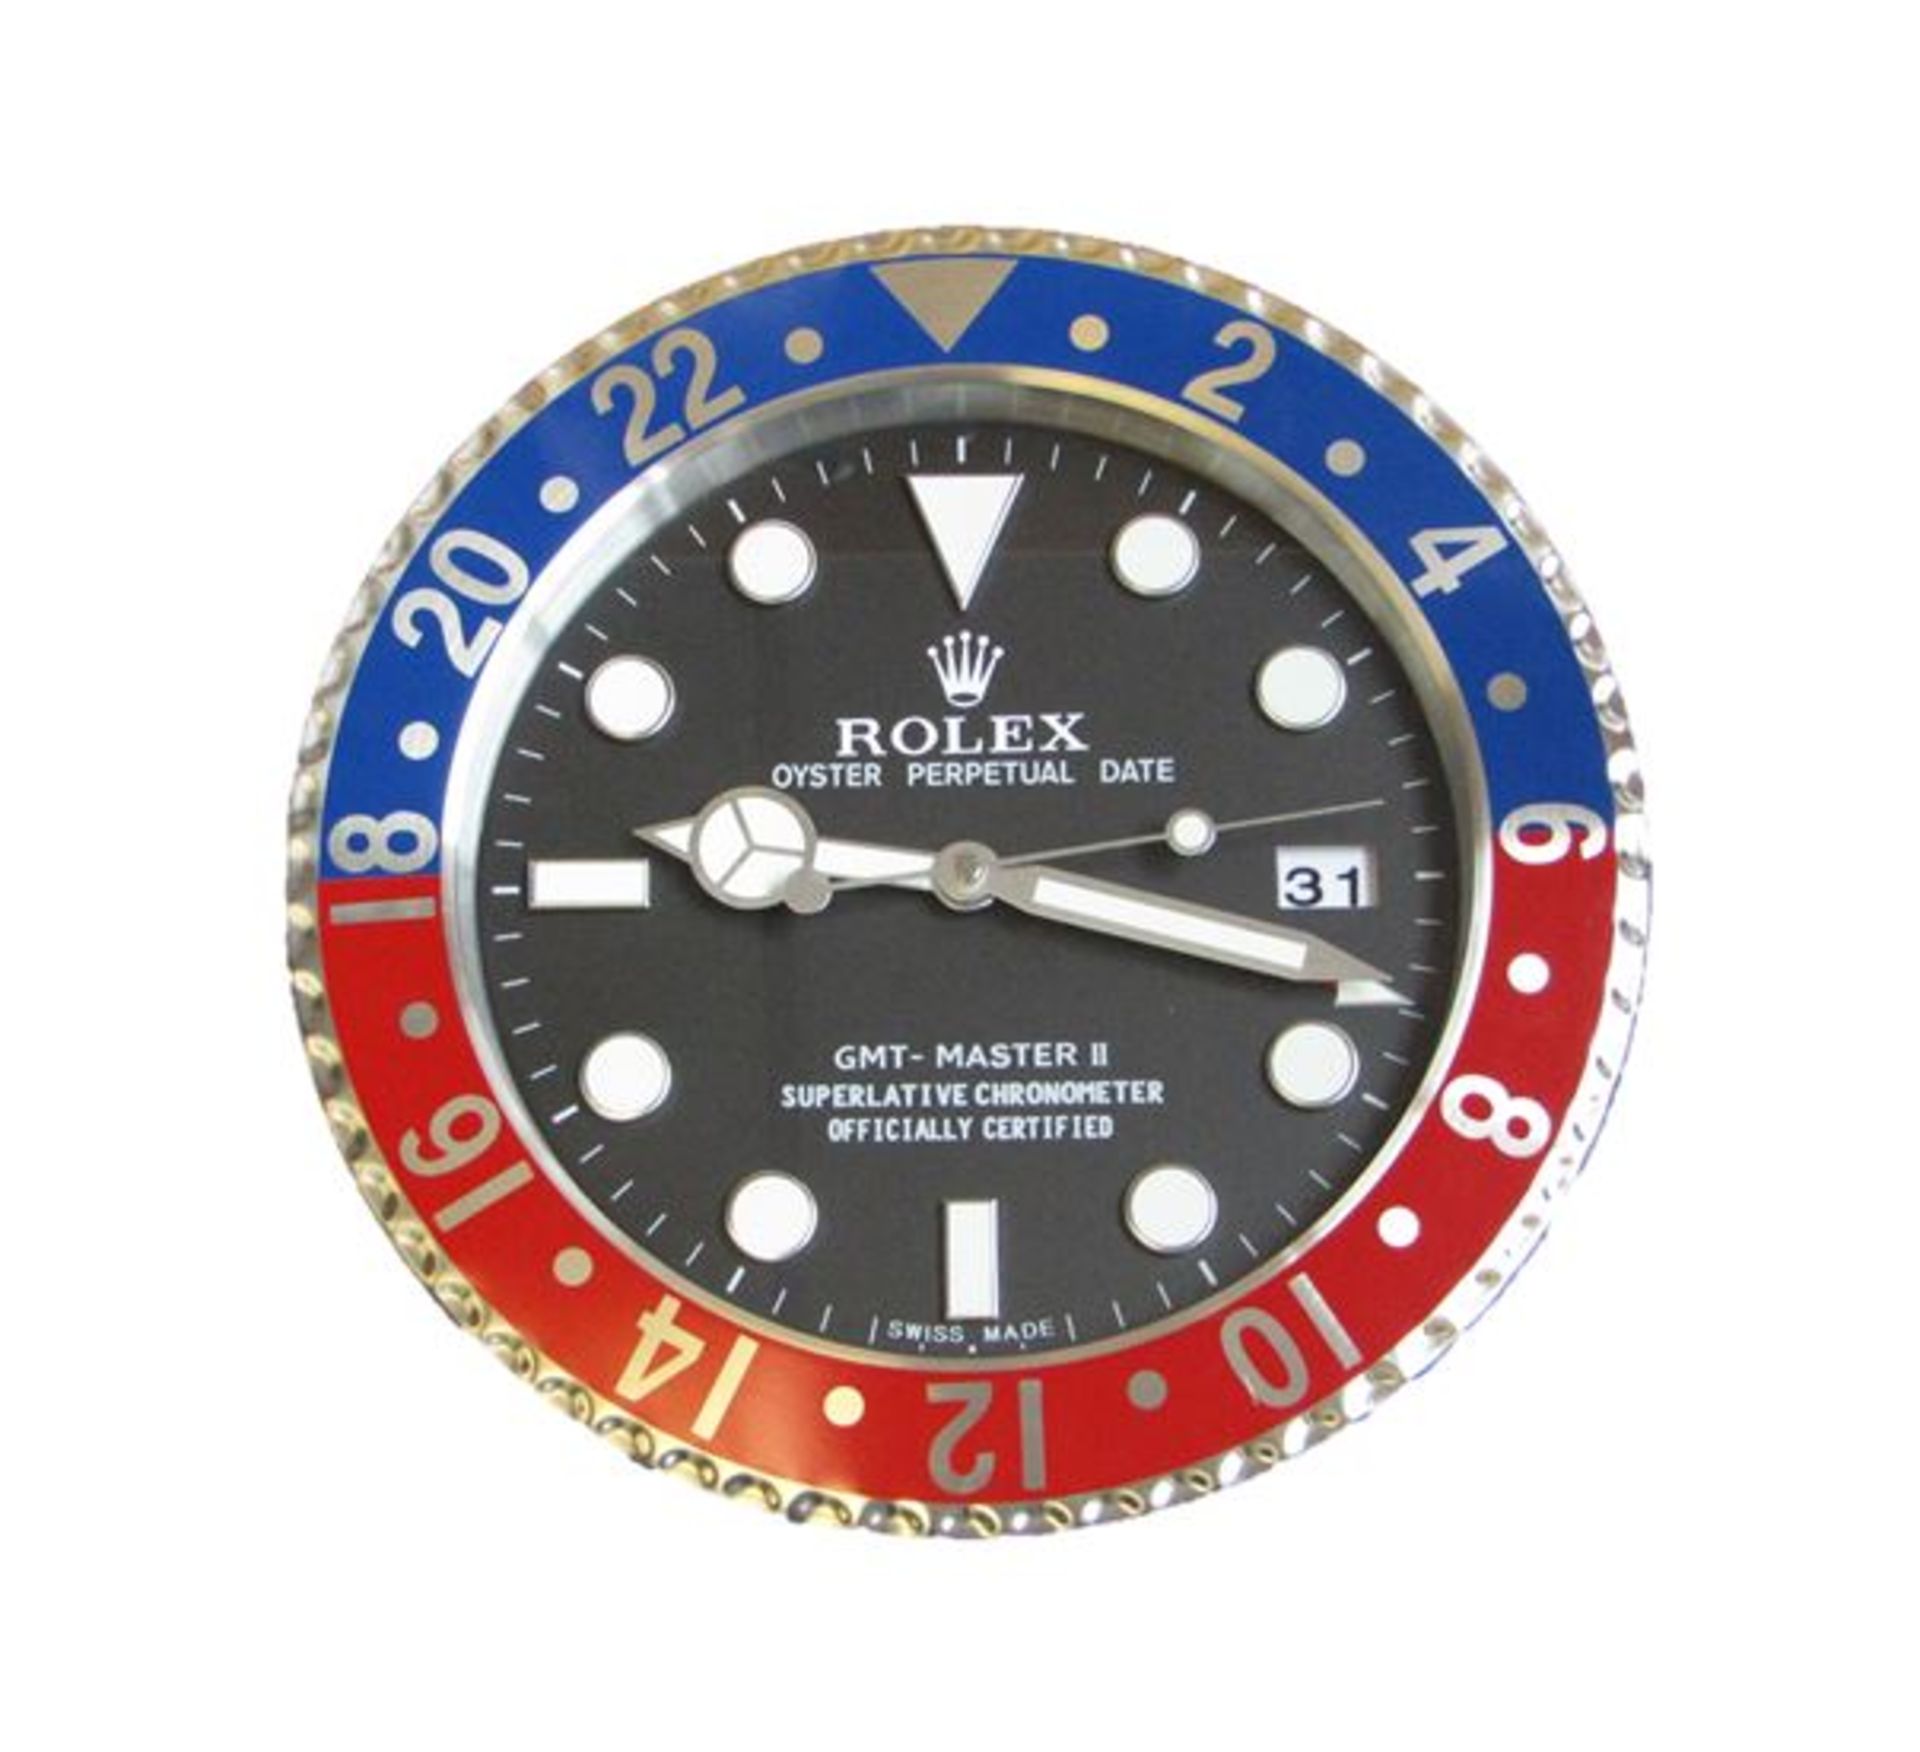 Promotional Replica Rolex GMT-Master II Clock in Blue & Red, New & Boxed